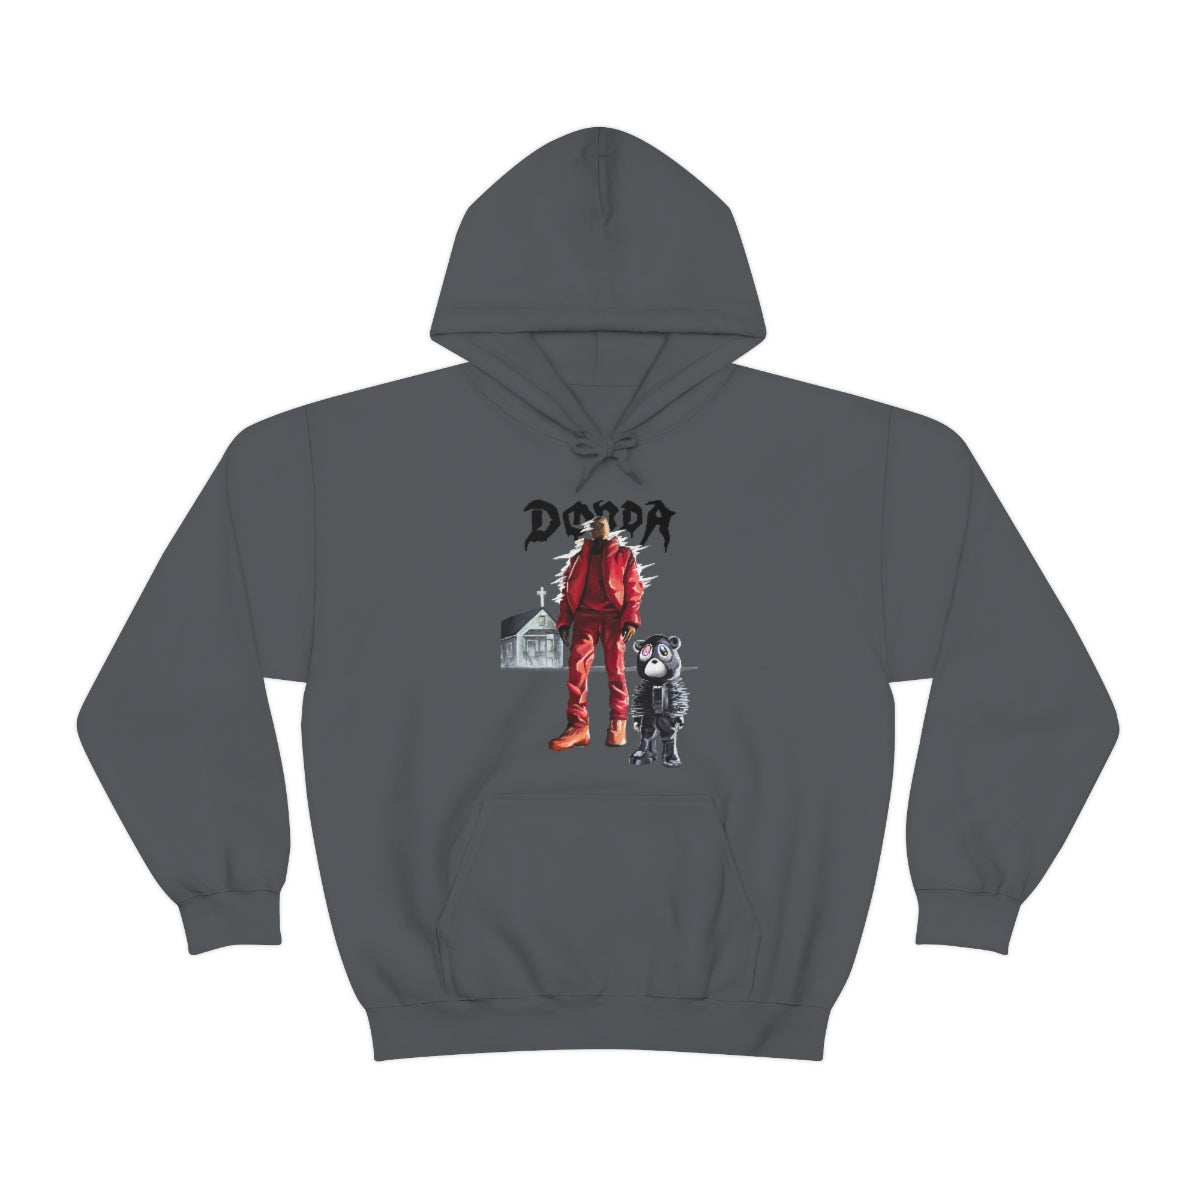 Kanye Donda (Double-Sided) - Hoodie - Tommy Manning Art